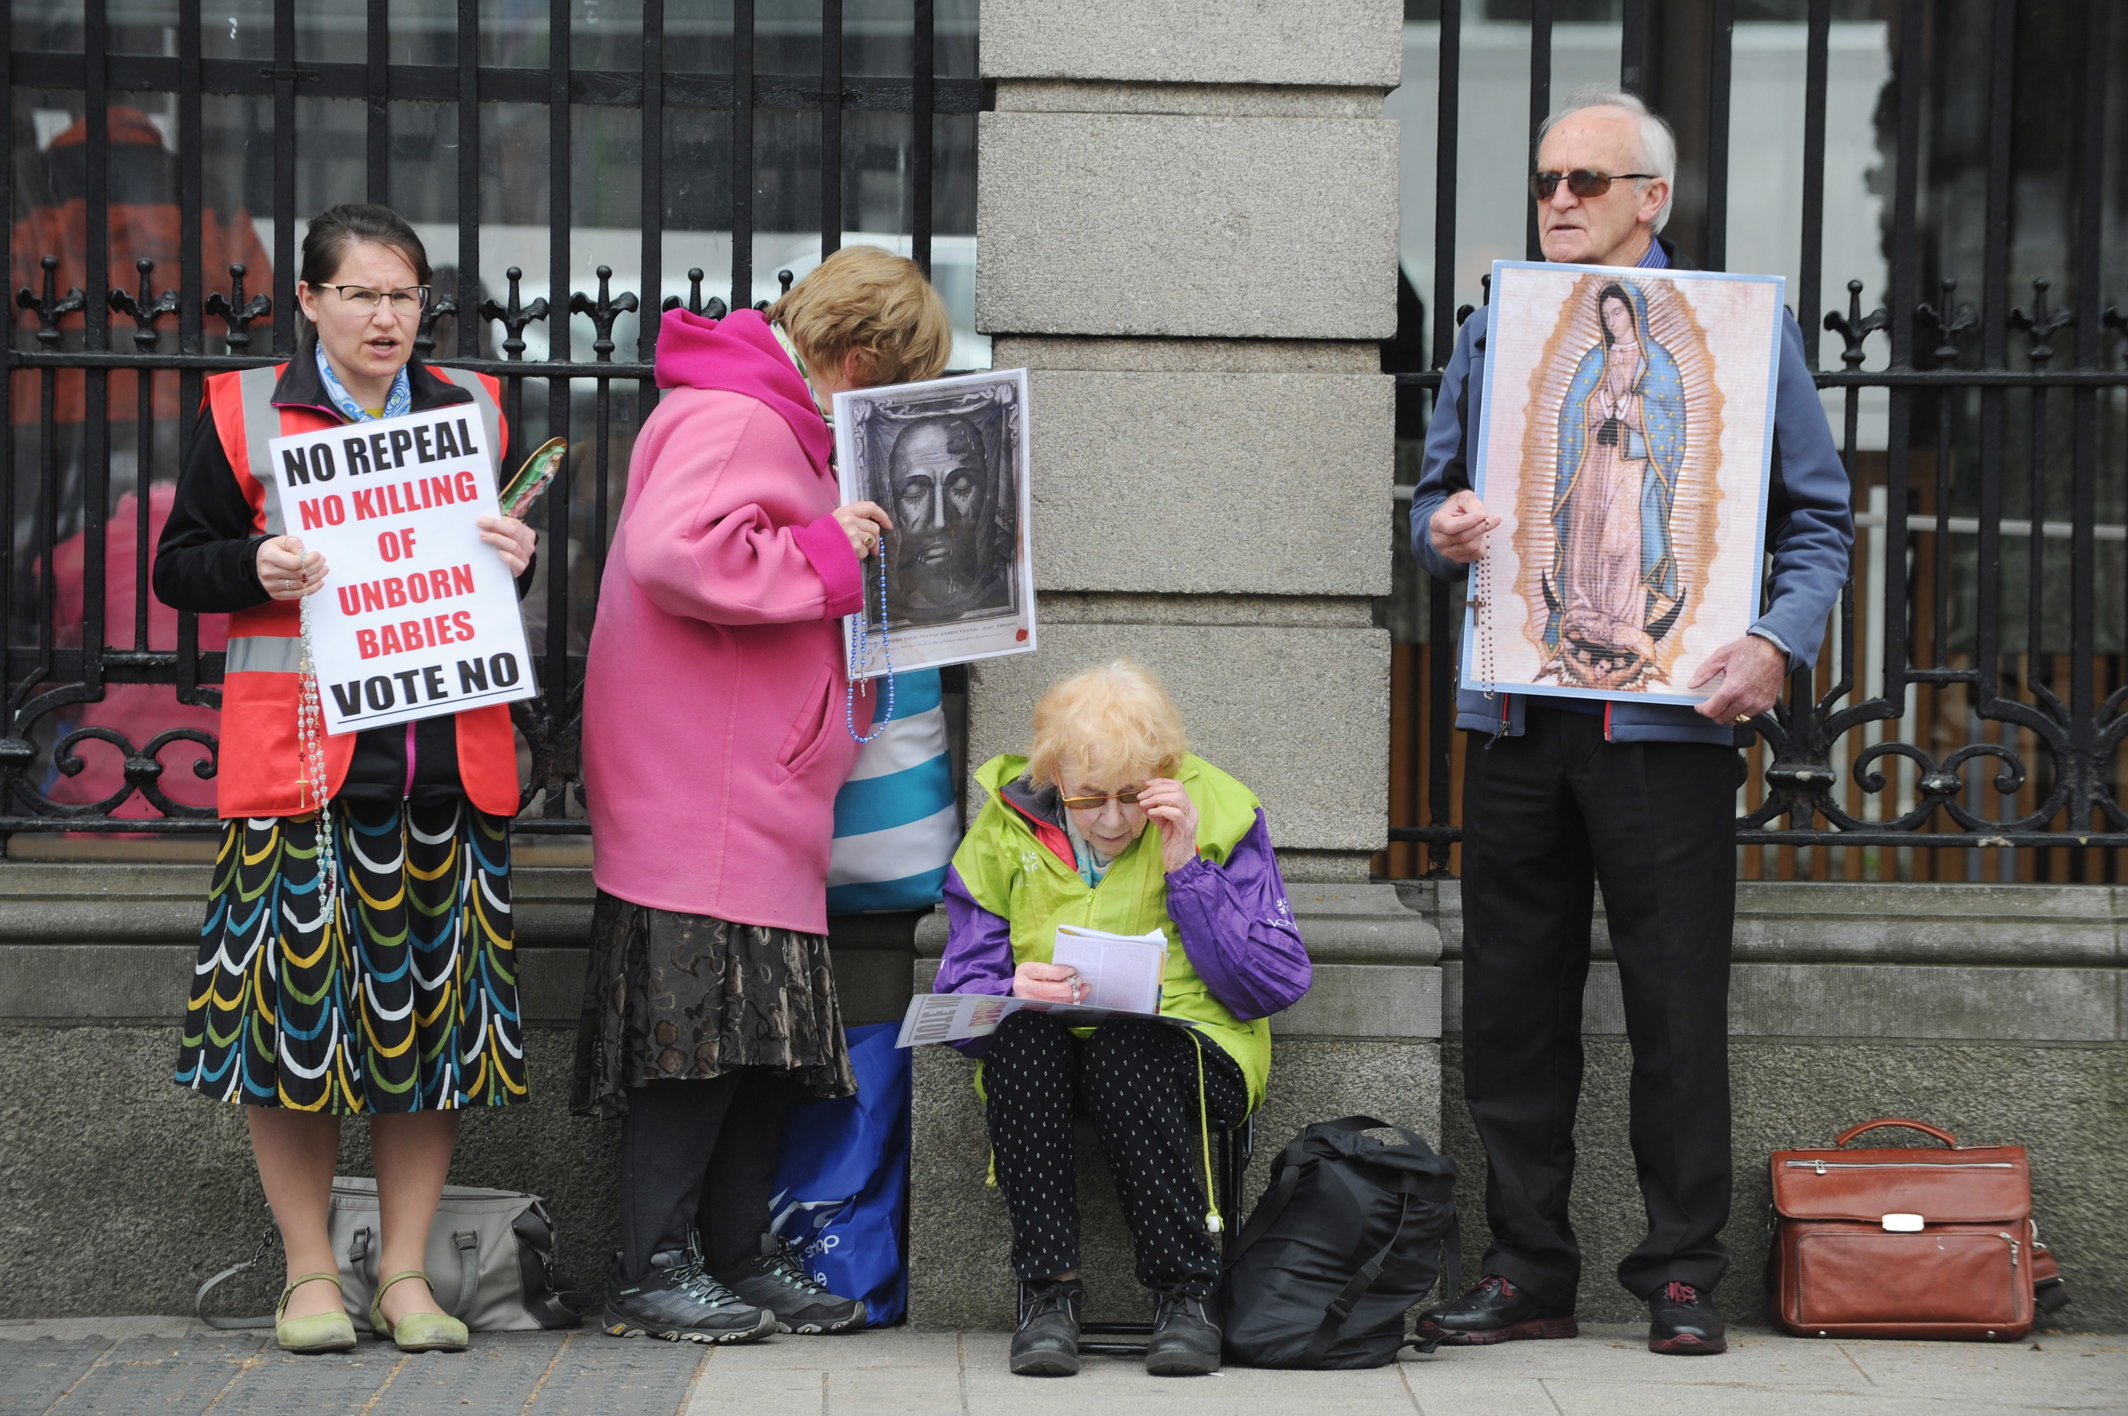 epa06755725 Pro life campaigners outside the Irish Parliament in the forthcoming abortion referendum in Dublin City, Ireland, 22 May 2018. On Friday 25 May the country will hold a referendum over an legislation of abortion in Ireland.  EPA/AIDAN CRAWLEY